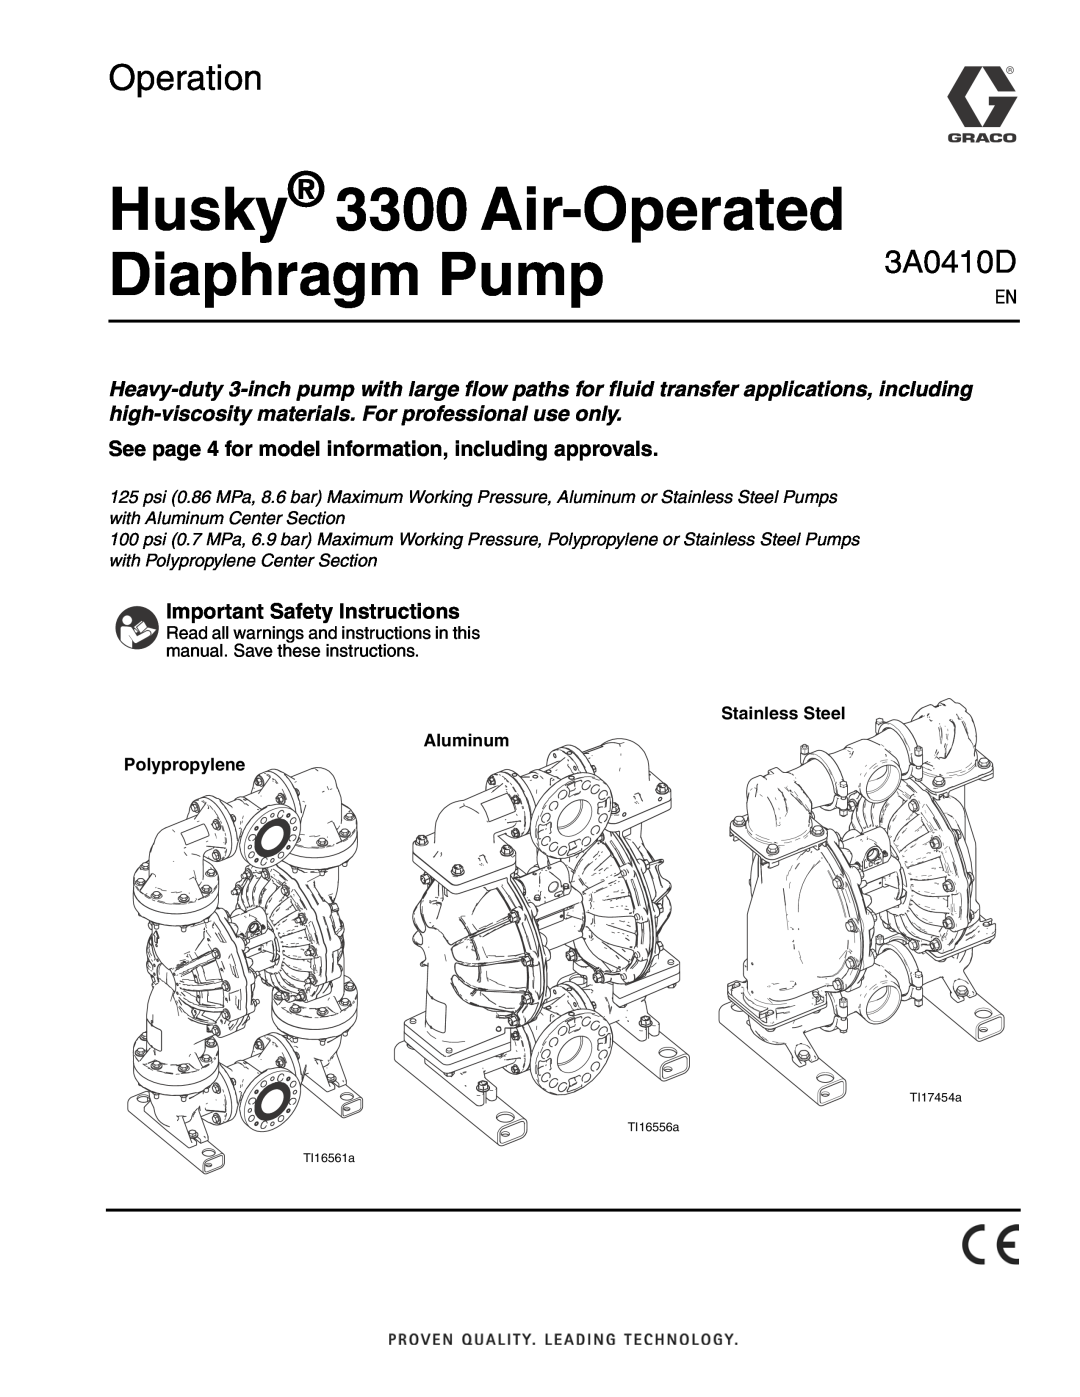 Graco 3A0410D important safety instructions Husky 3300 Air-Operated, Diaphragm Pump, Operation 